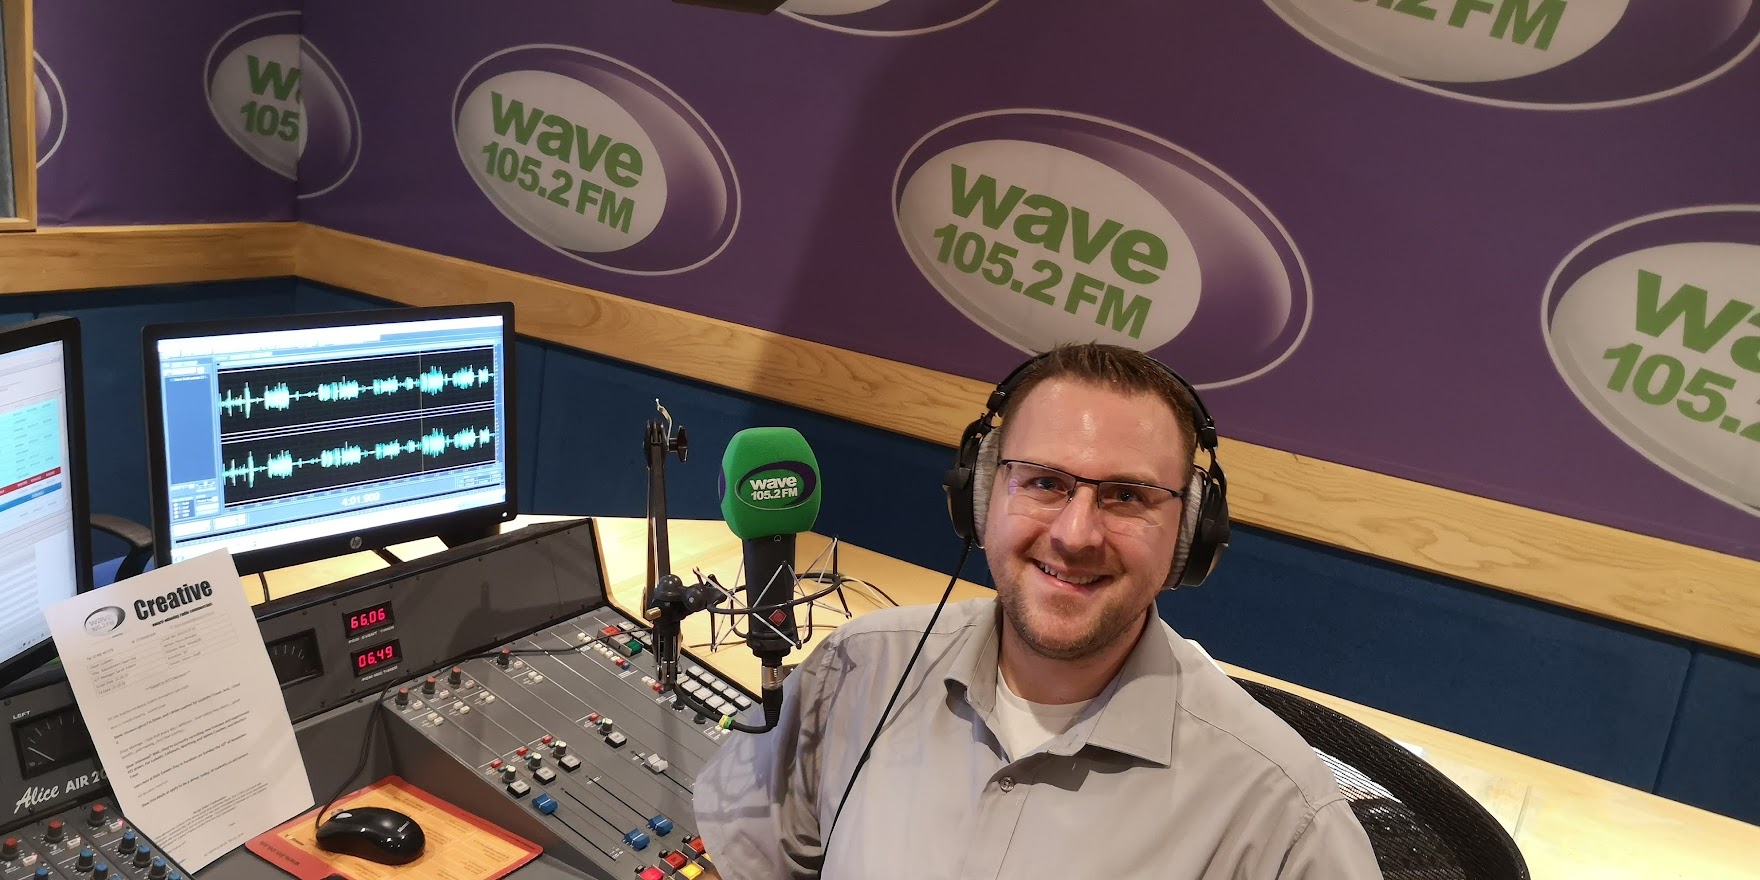 Steve Small recording voice over at Wave 105 radio station studio